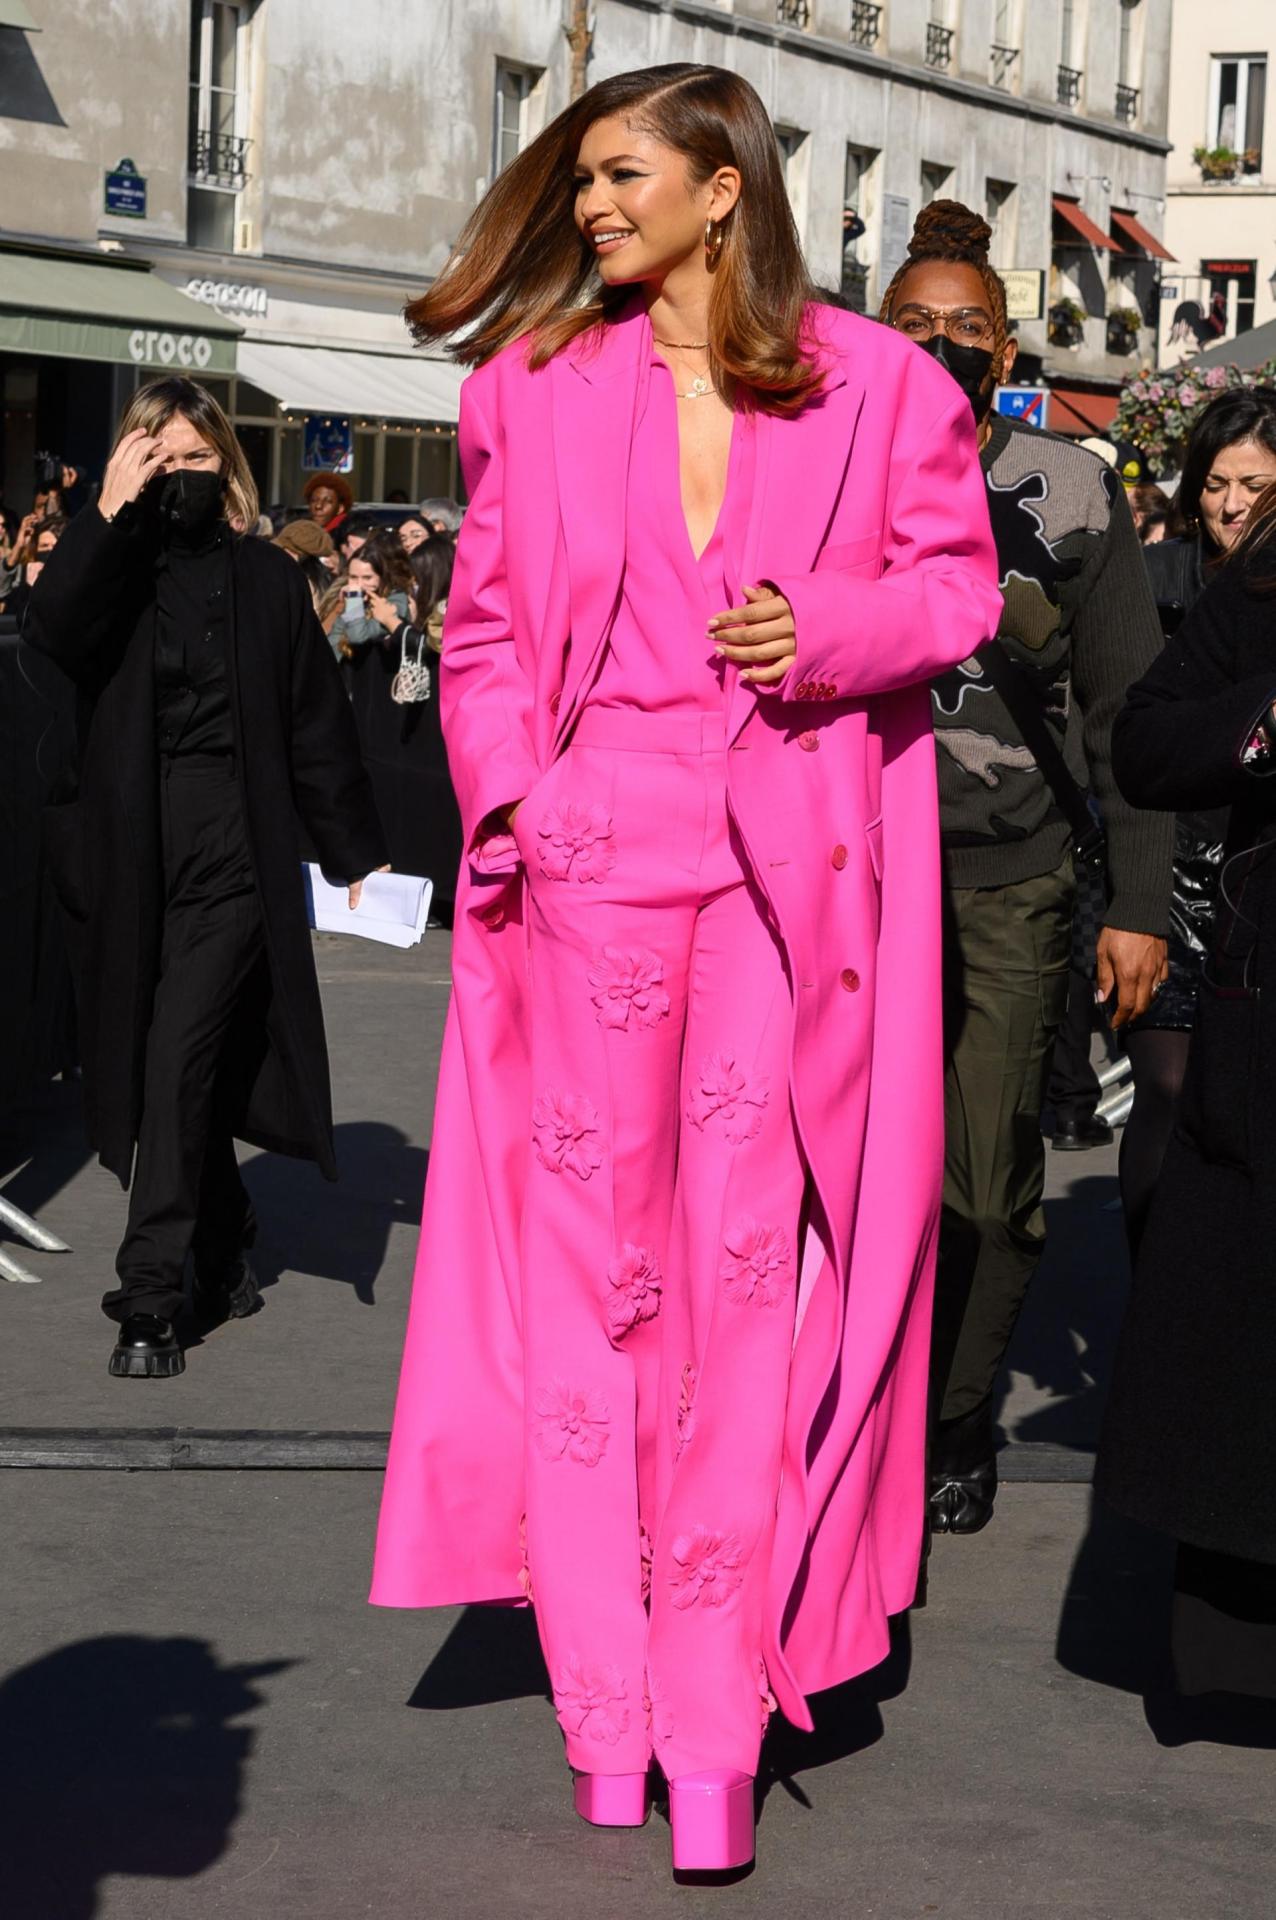 Celebrities wear the Valentino Pink PP Collection (1/?)
03.06.22 - 04.16.22Mar 06, 2022 | Zendaya - Attends Valentinos Fall/Win 22-23 Show
Mar 10, 2022 | Maluma - Performs in Paris
Mar 13, 2022 | Simone Ashley - Attends the 2022 BAFTAs
Mar 16, 2022 | Maluma - Performs in London
Apr 04, 2022 | Saweetie - Attends the 2022 Grammys
Apr 04, 2022 | Billy porter - Presents at the 2022 Grammys
Apr 07, 2022 | Kris Jenner - At the premiere of The Kardashians
Apr 14, 2022 | Gillian Anderson - At the premier of The First Lady
Apr 15, 2022 | Omar Apollo  - Performs at Coachella
Apr 16, 2022 | Conan Gray - Performs at Coachella #celebrity fashion#valentino #valentino pink pp #zendaya#conan gray#simone ashley#maluma#saweetie#billy porter#kris jenner#gillian anderson#omar apollo#mine#hot pink